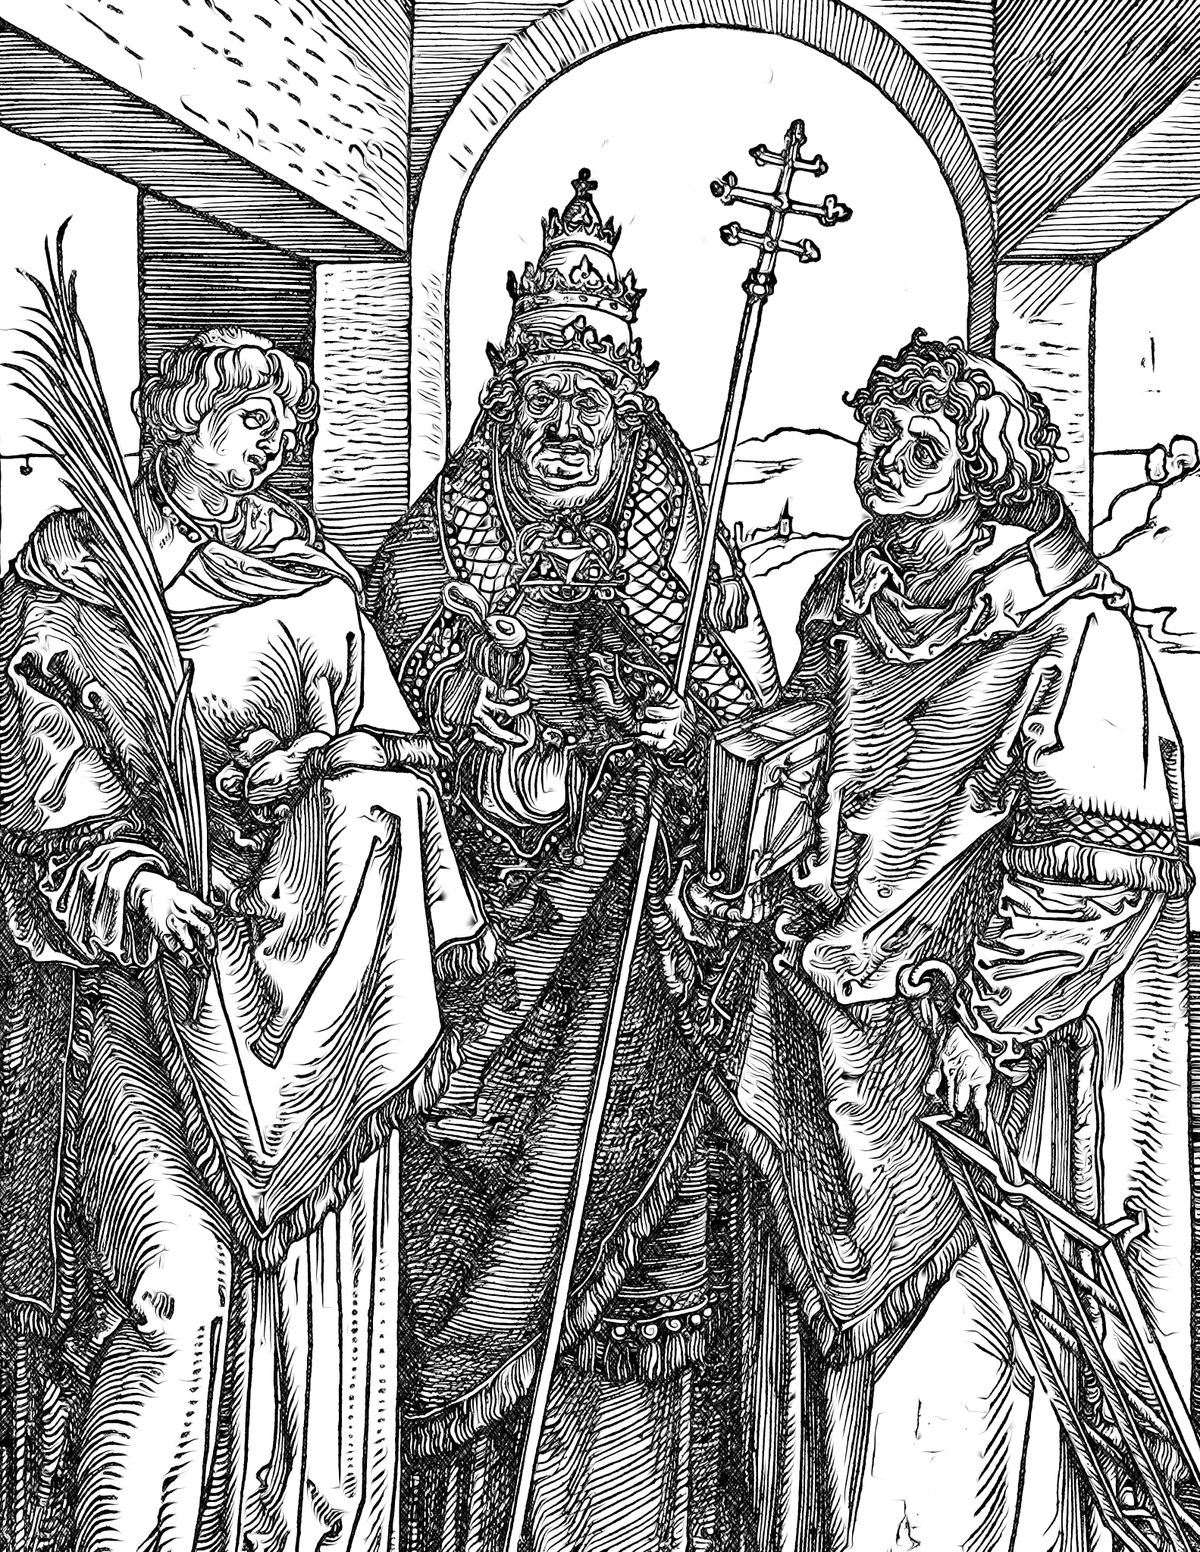 saint lawrence coloring pages